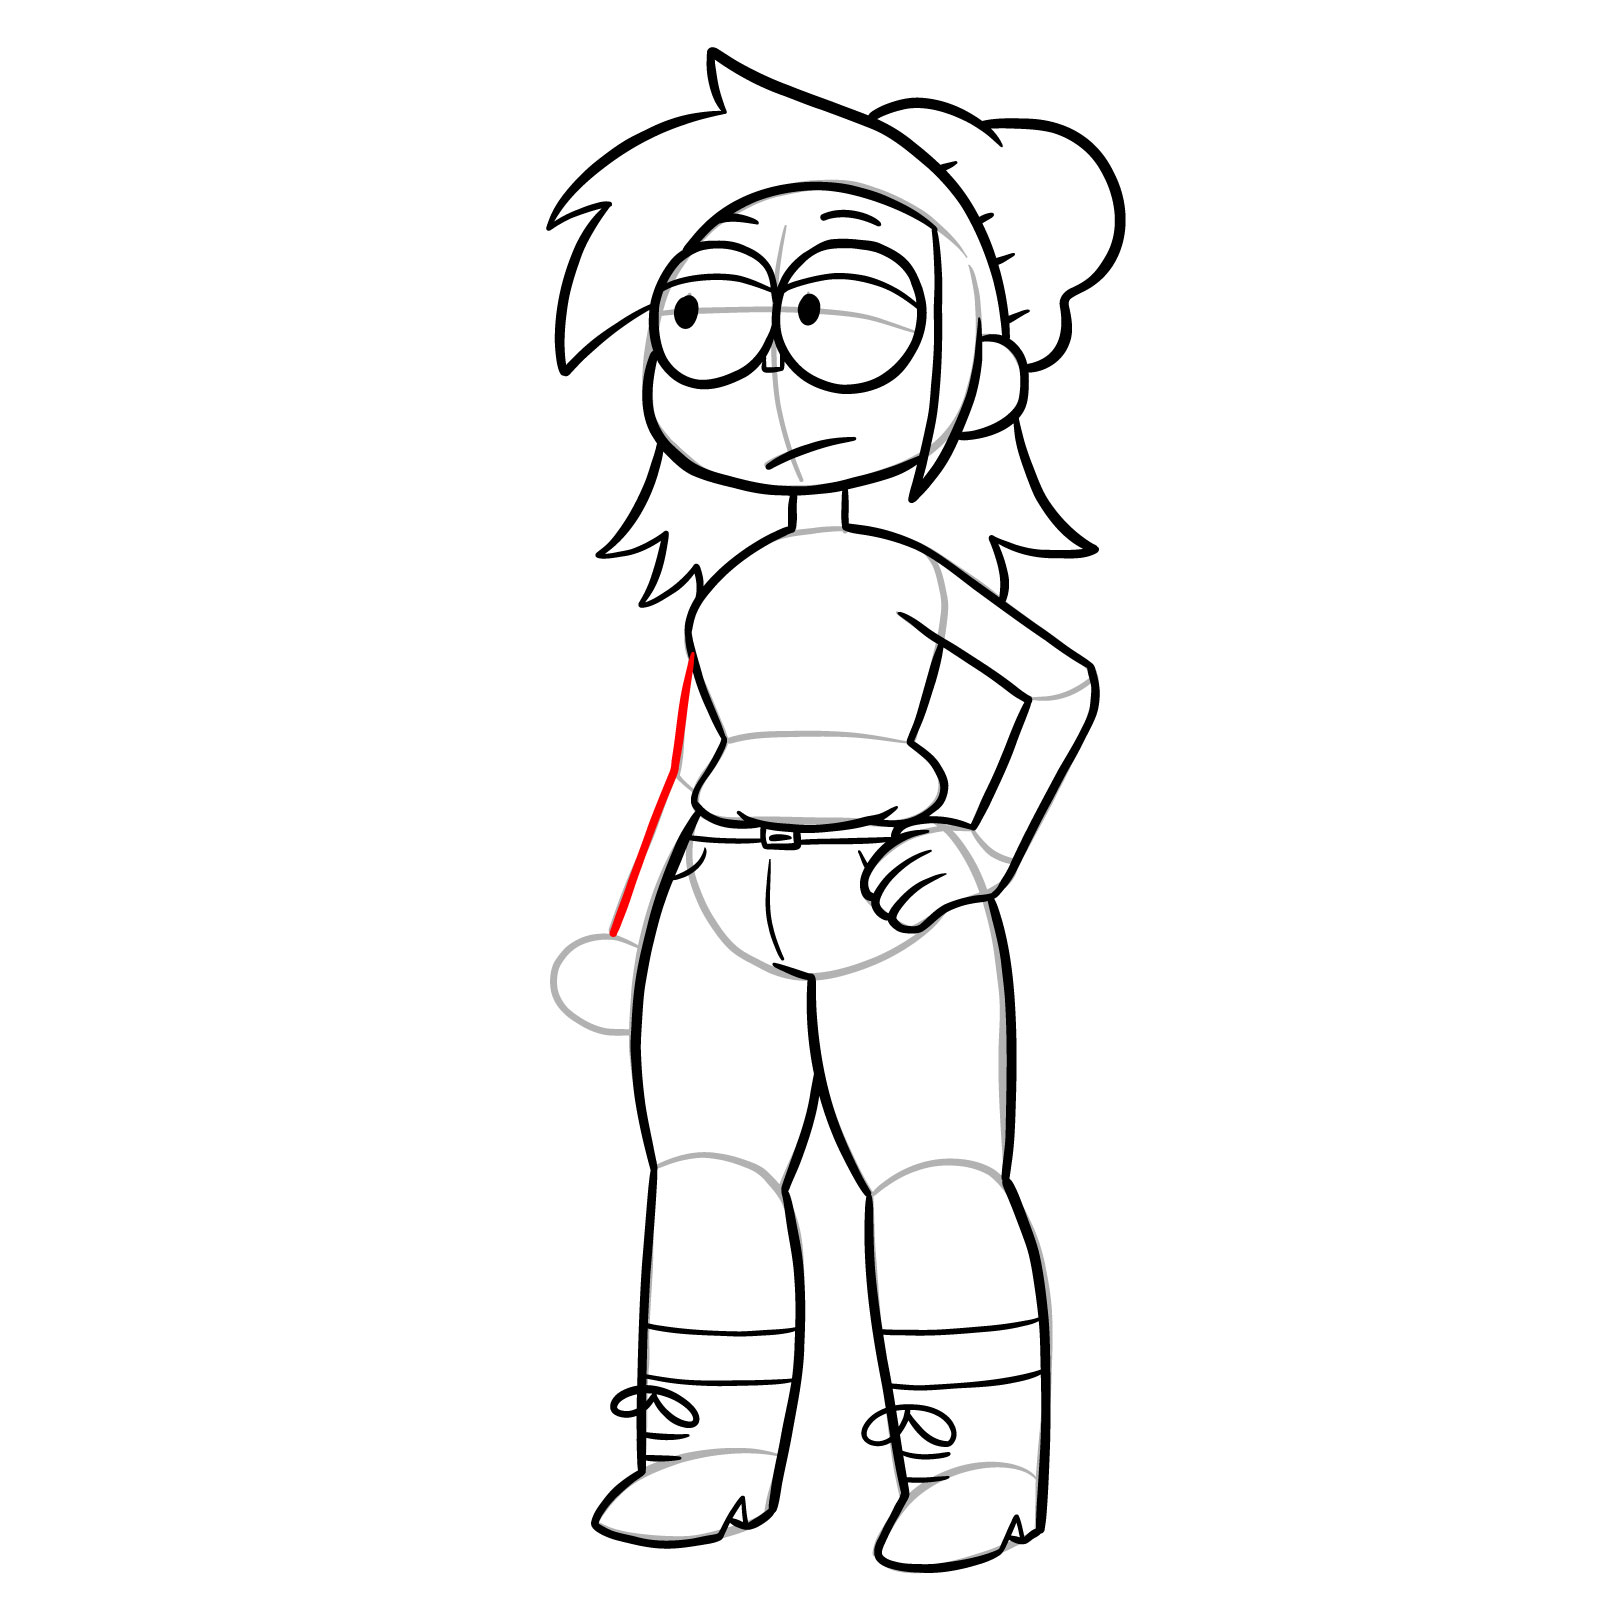 How to draw Actor Enid from OK K.O.! - step 24